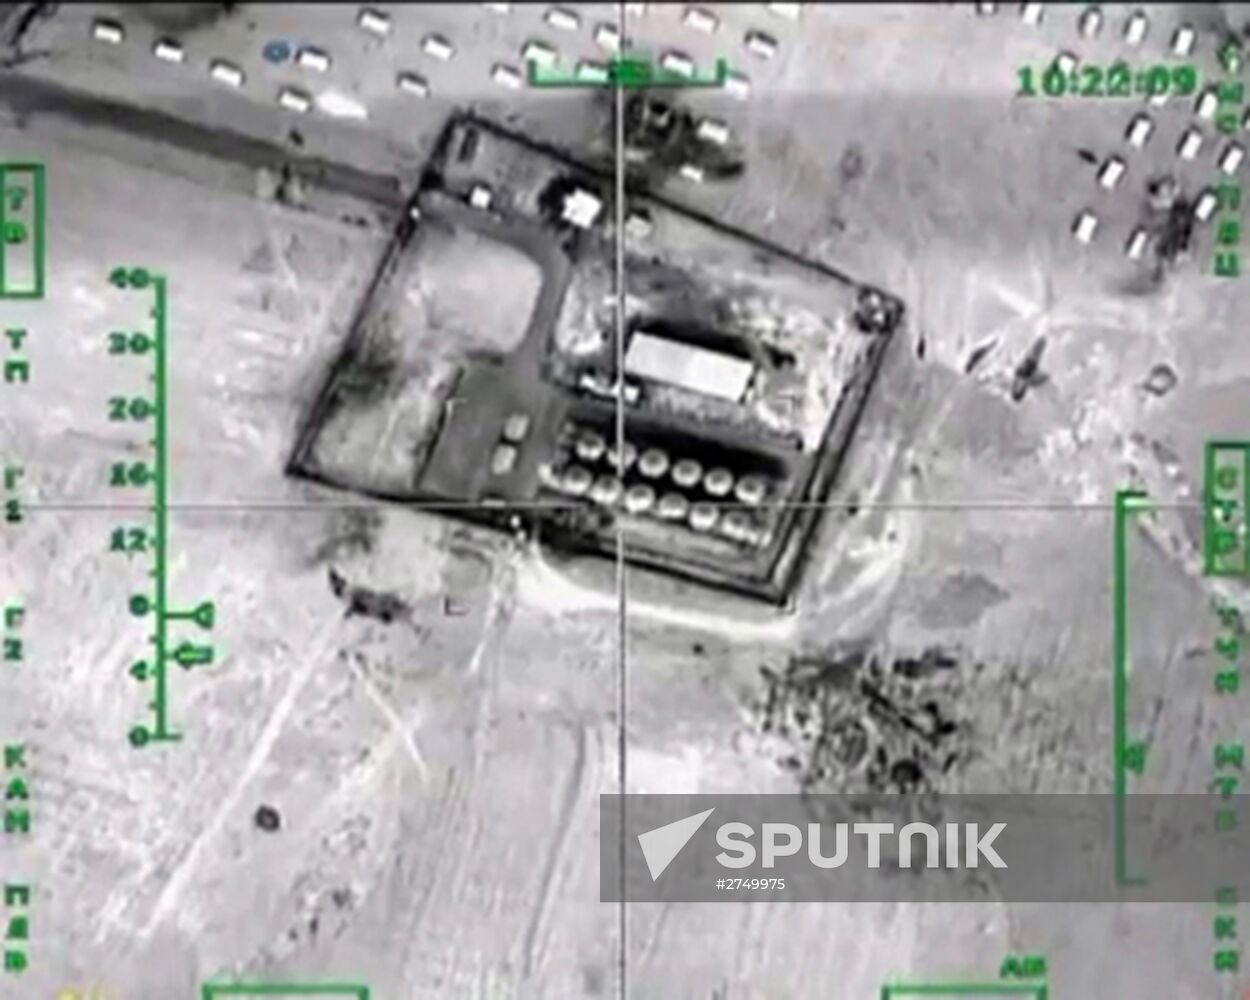 Russian Aerospace Forces' air strikes on Syria